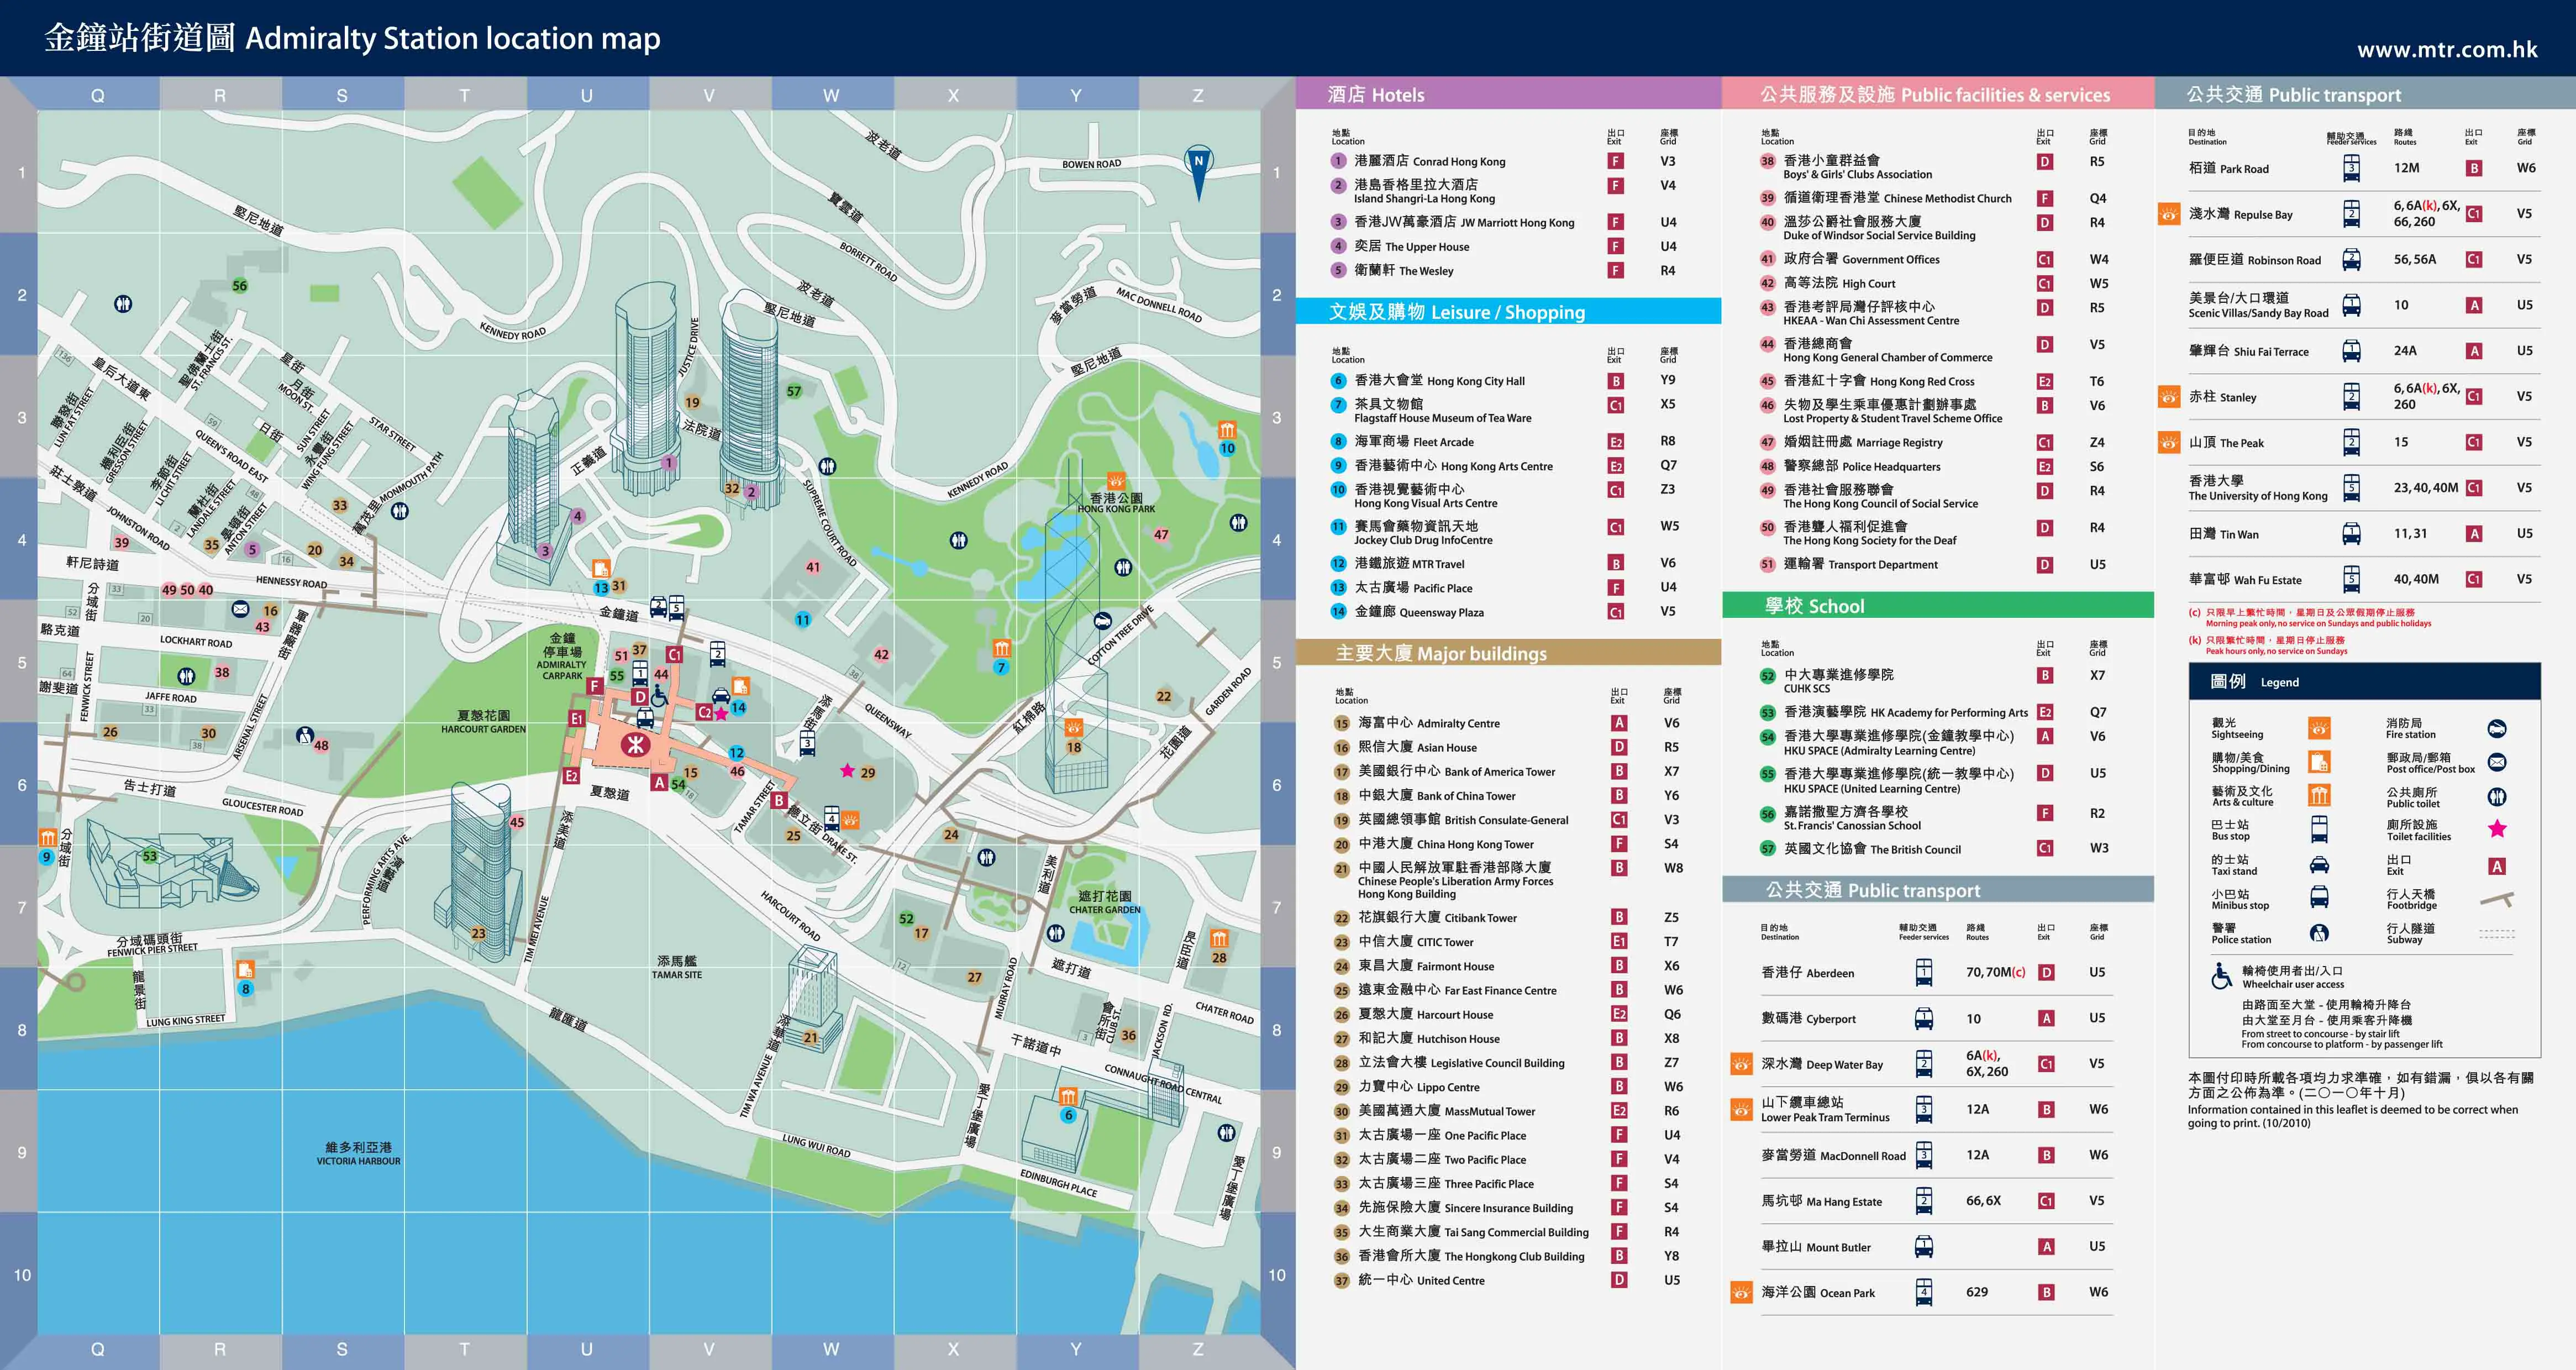 Hong Kong: Central MTR station area map 2012-2013